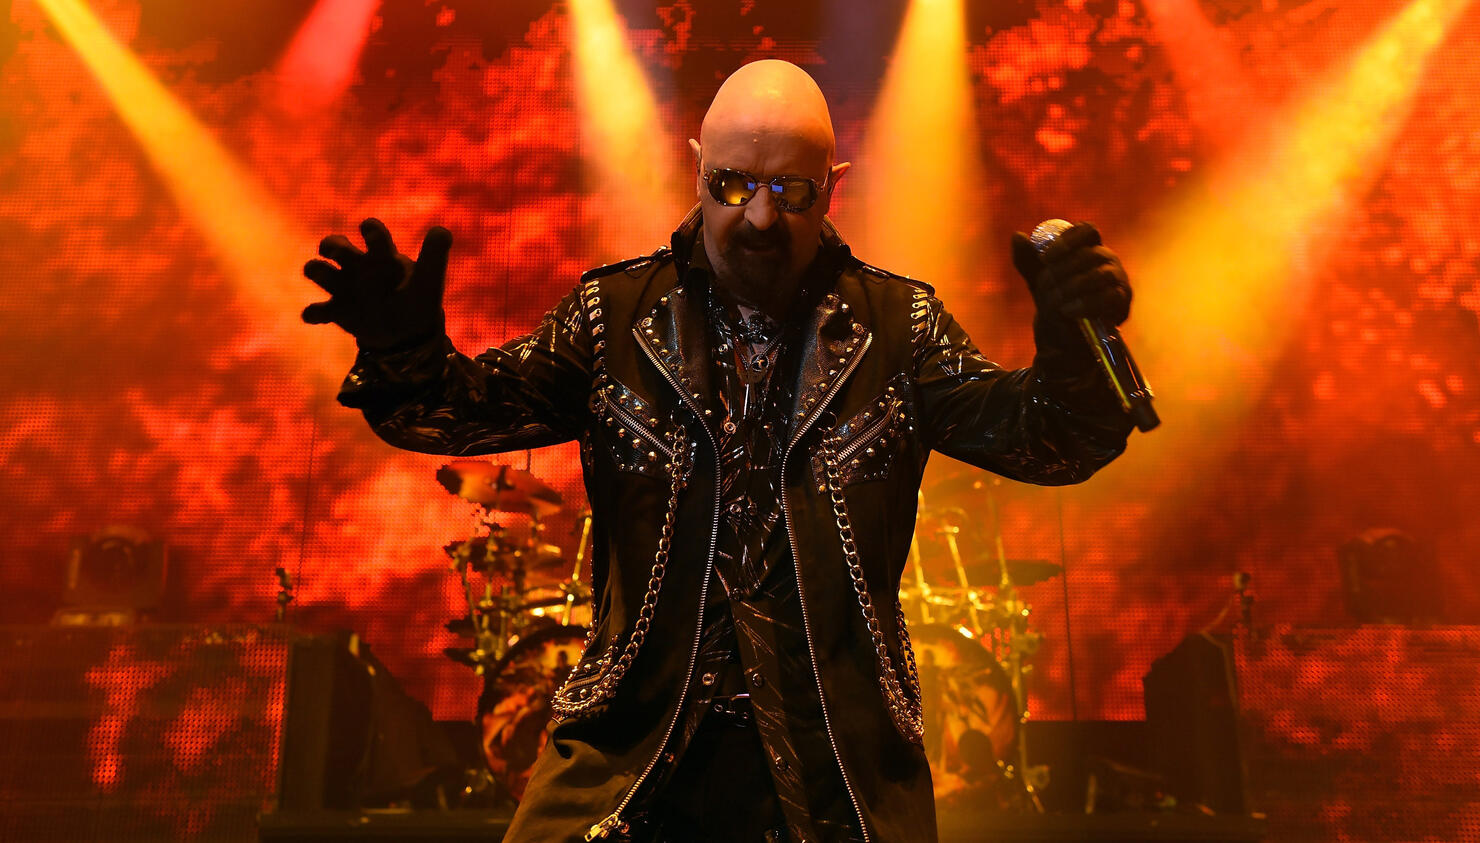 Judas Priest In Concert At The Palms